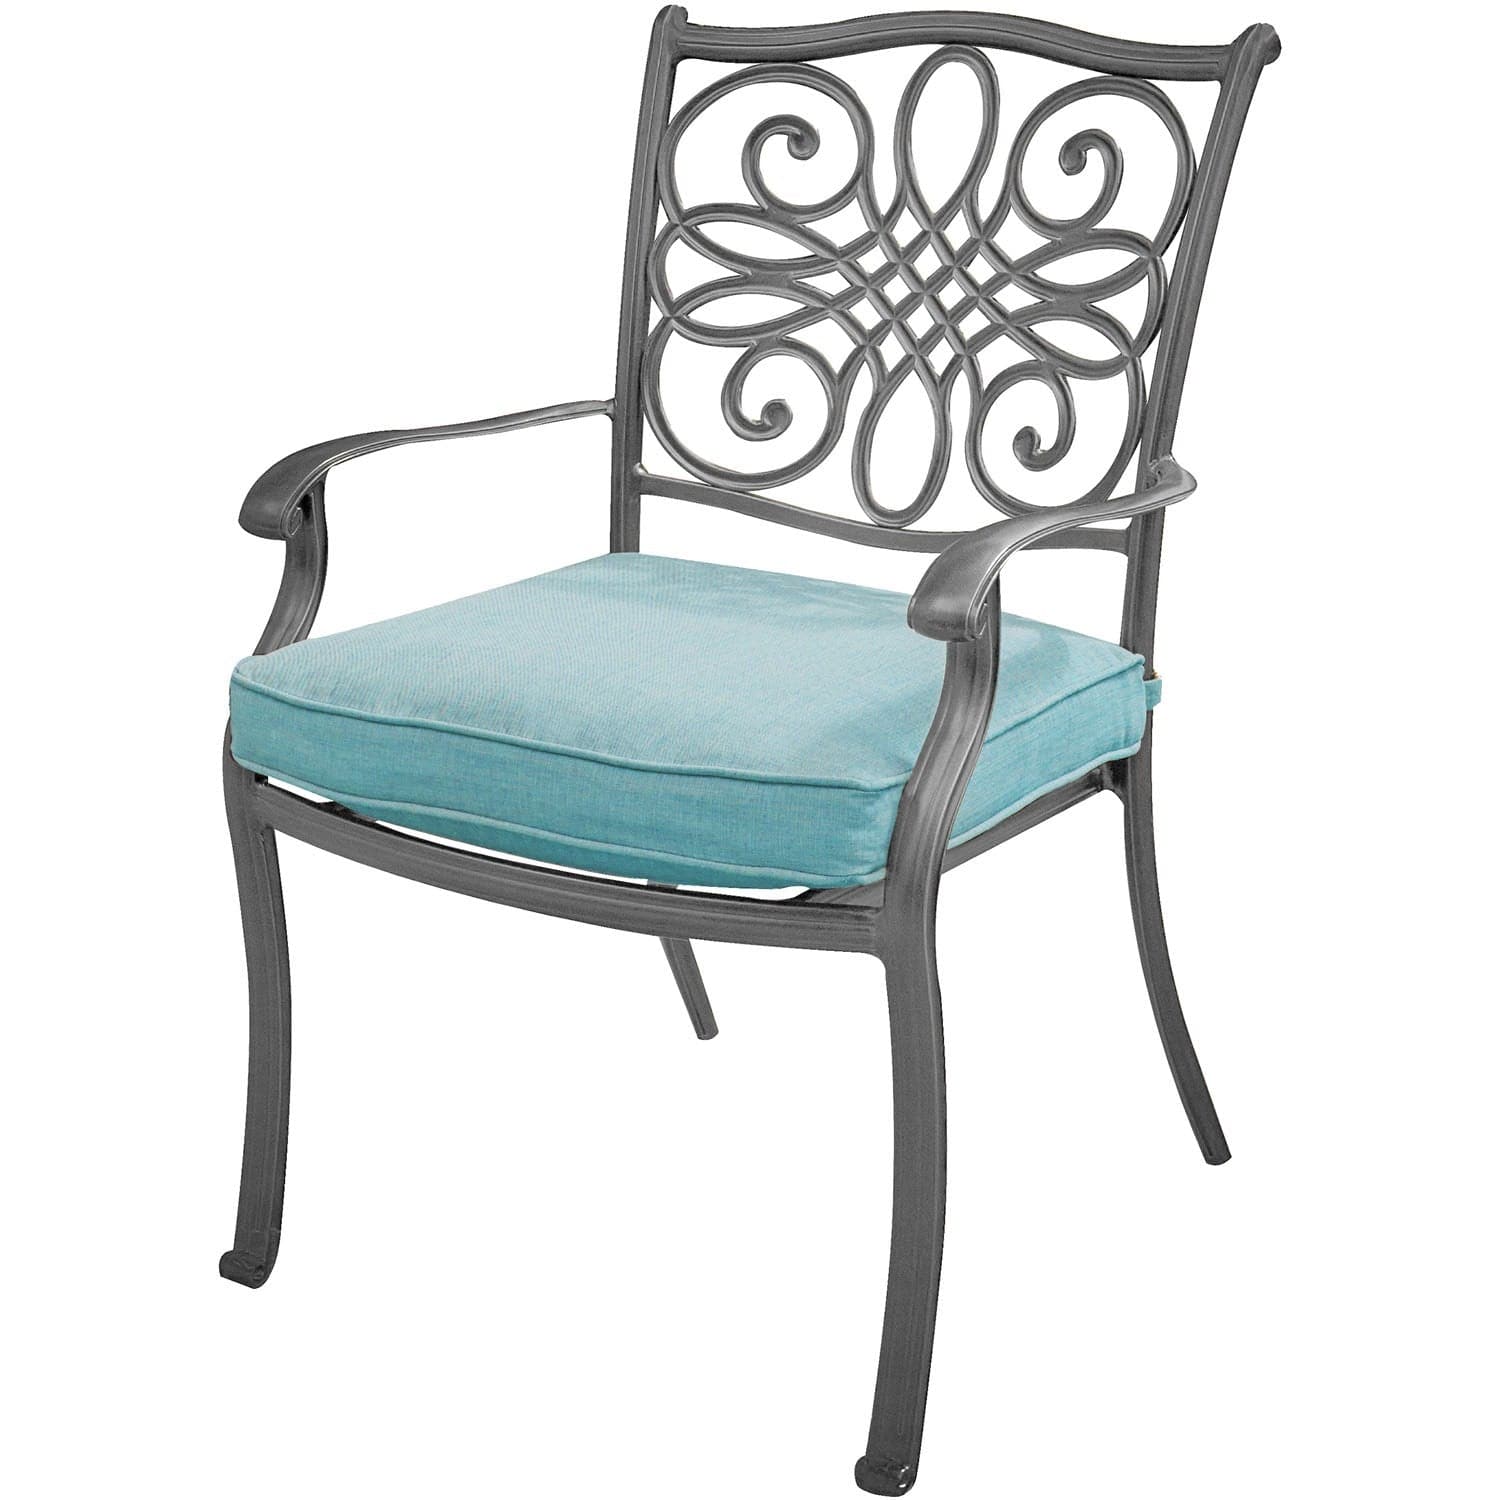 Hanover Outdoor Dining Set Hanover - Traditions 5-Piece Dining Set in Blue with 4 Chairs and a 48" Round Table in a Gray Finish | TRADDNG5PC-BLU